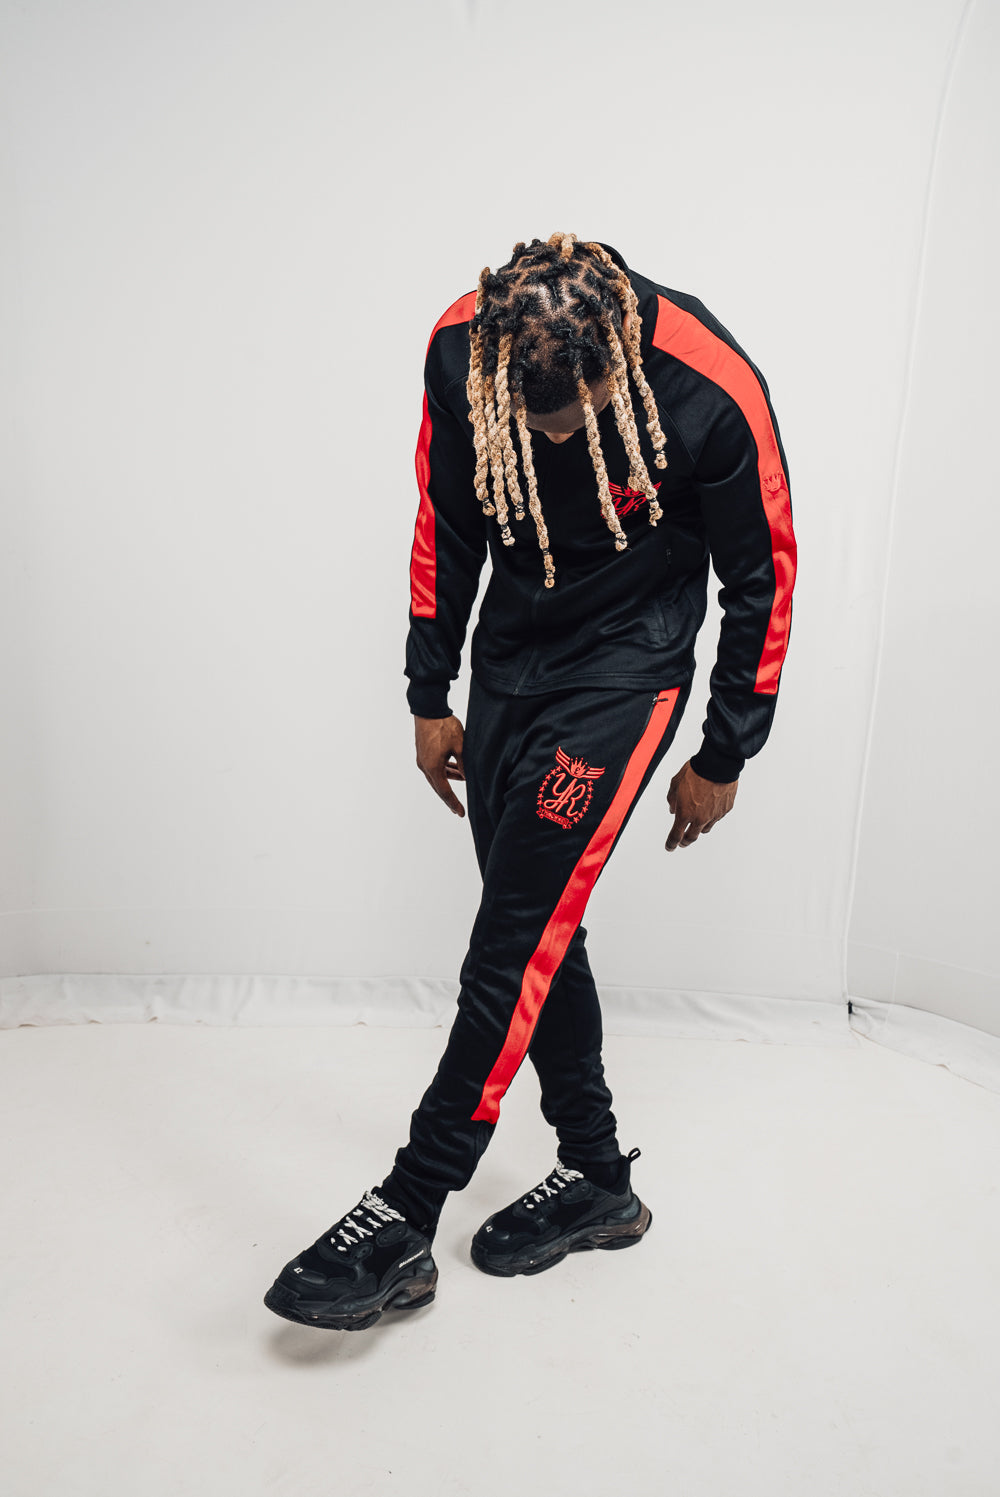 "A black and red YUNG'N'RICH Men's Funnel Neck Contrast Panel Stripe Tracksuit, featuring a fitted design with zip pockets, made with a blend of 90% polyester and 10% spandex, suitable for both men and women".